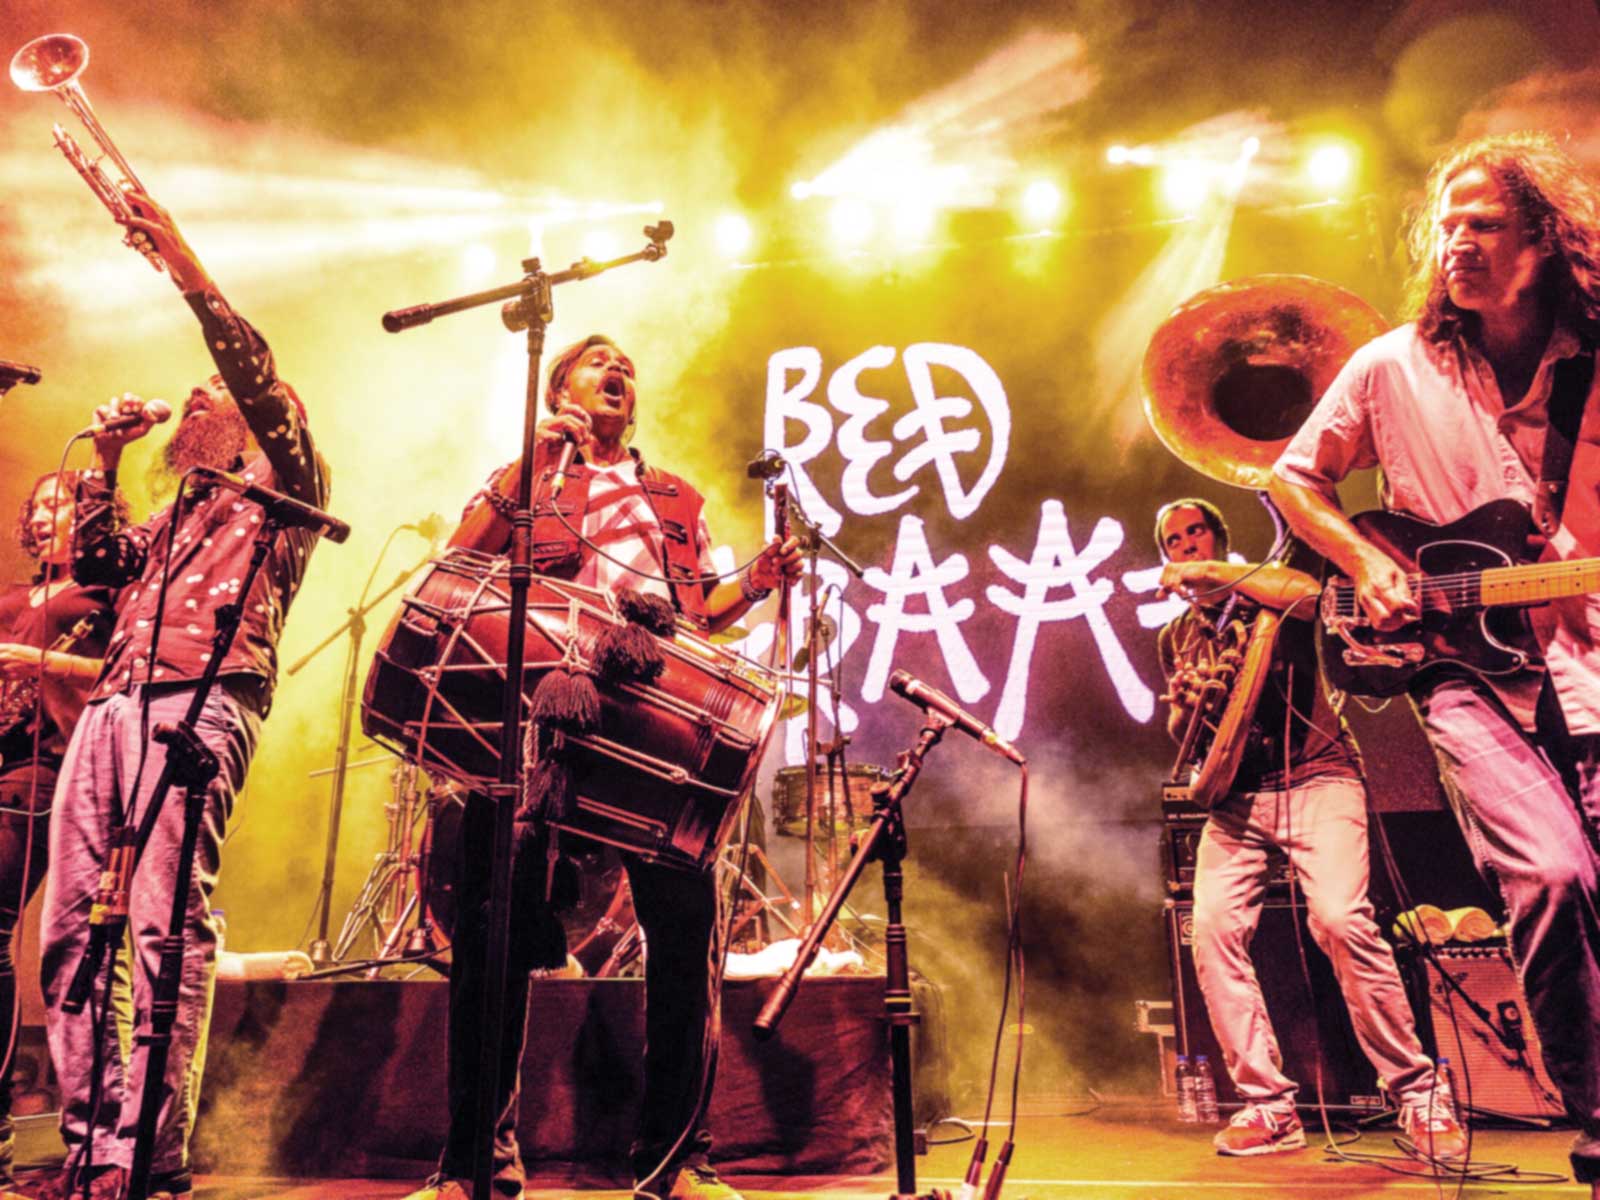 Red Baraat Band